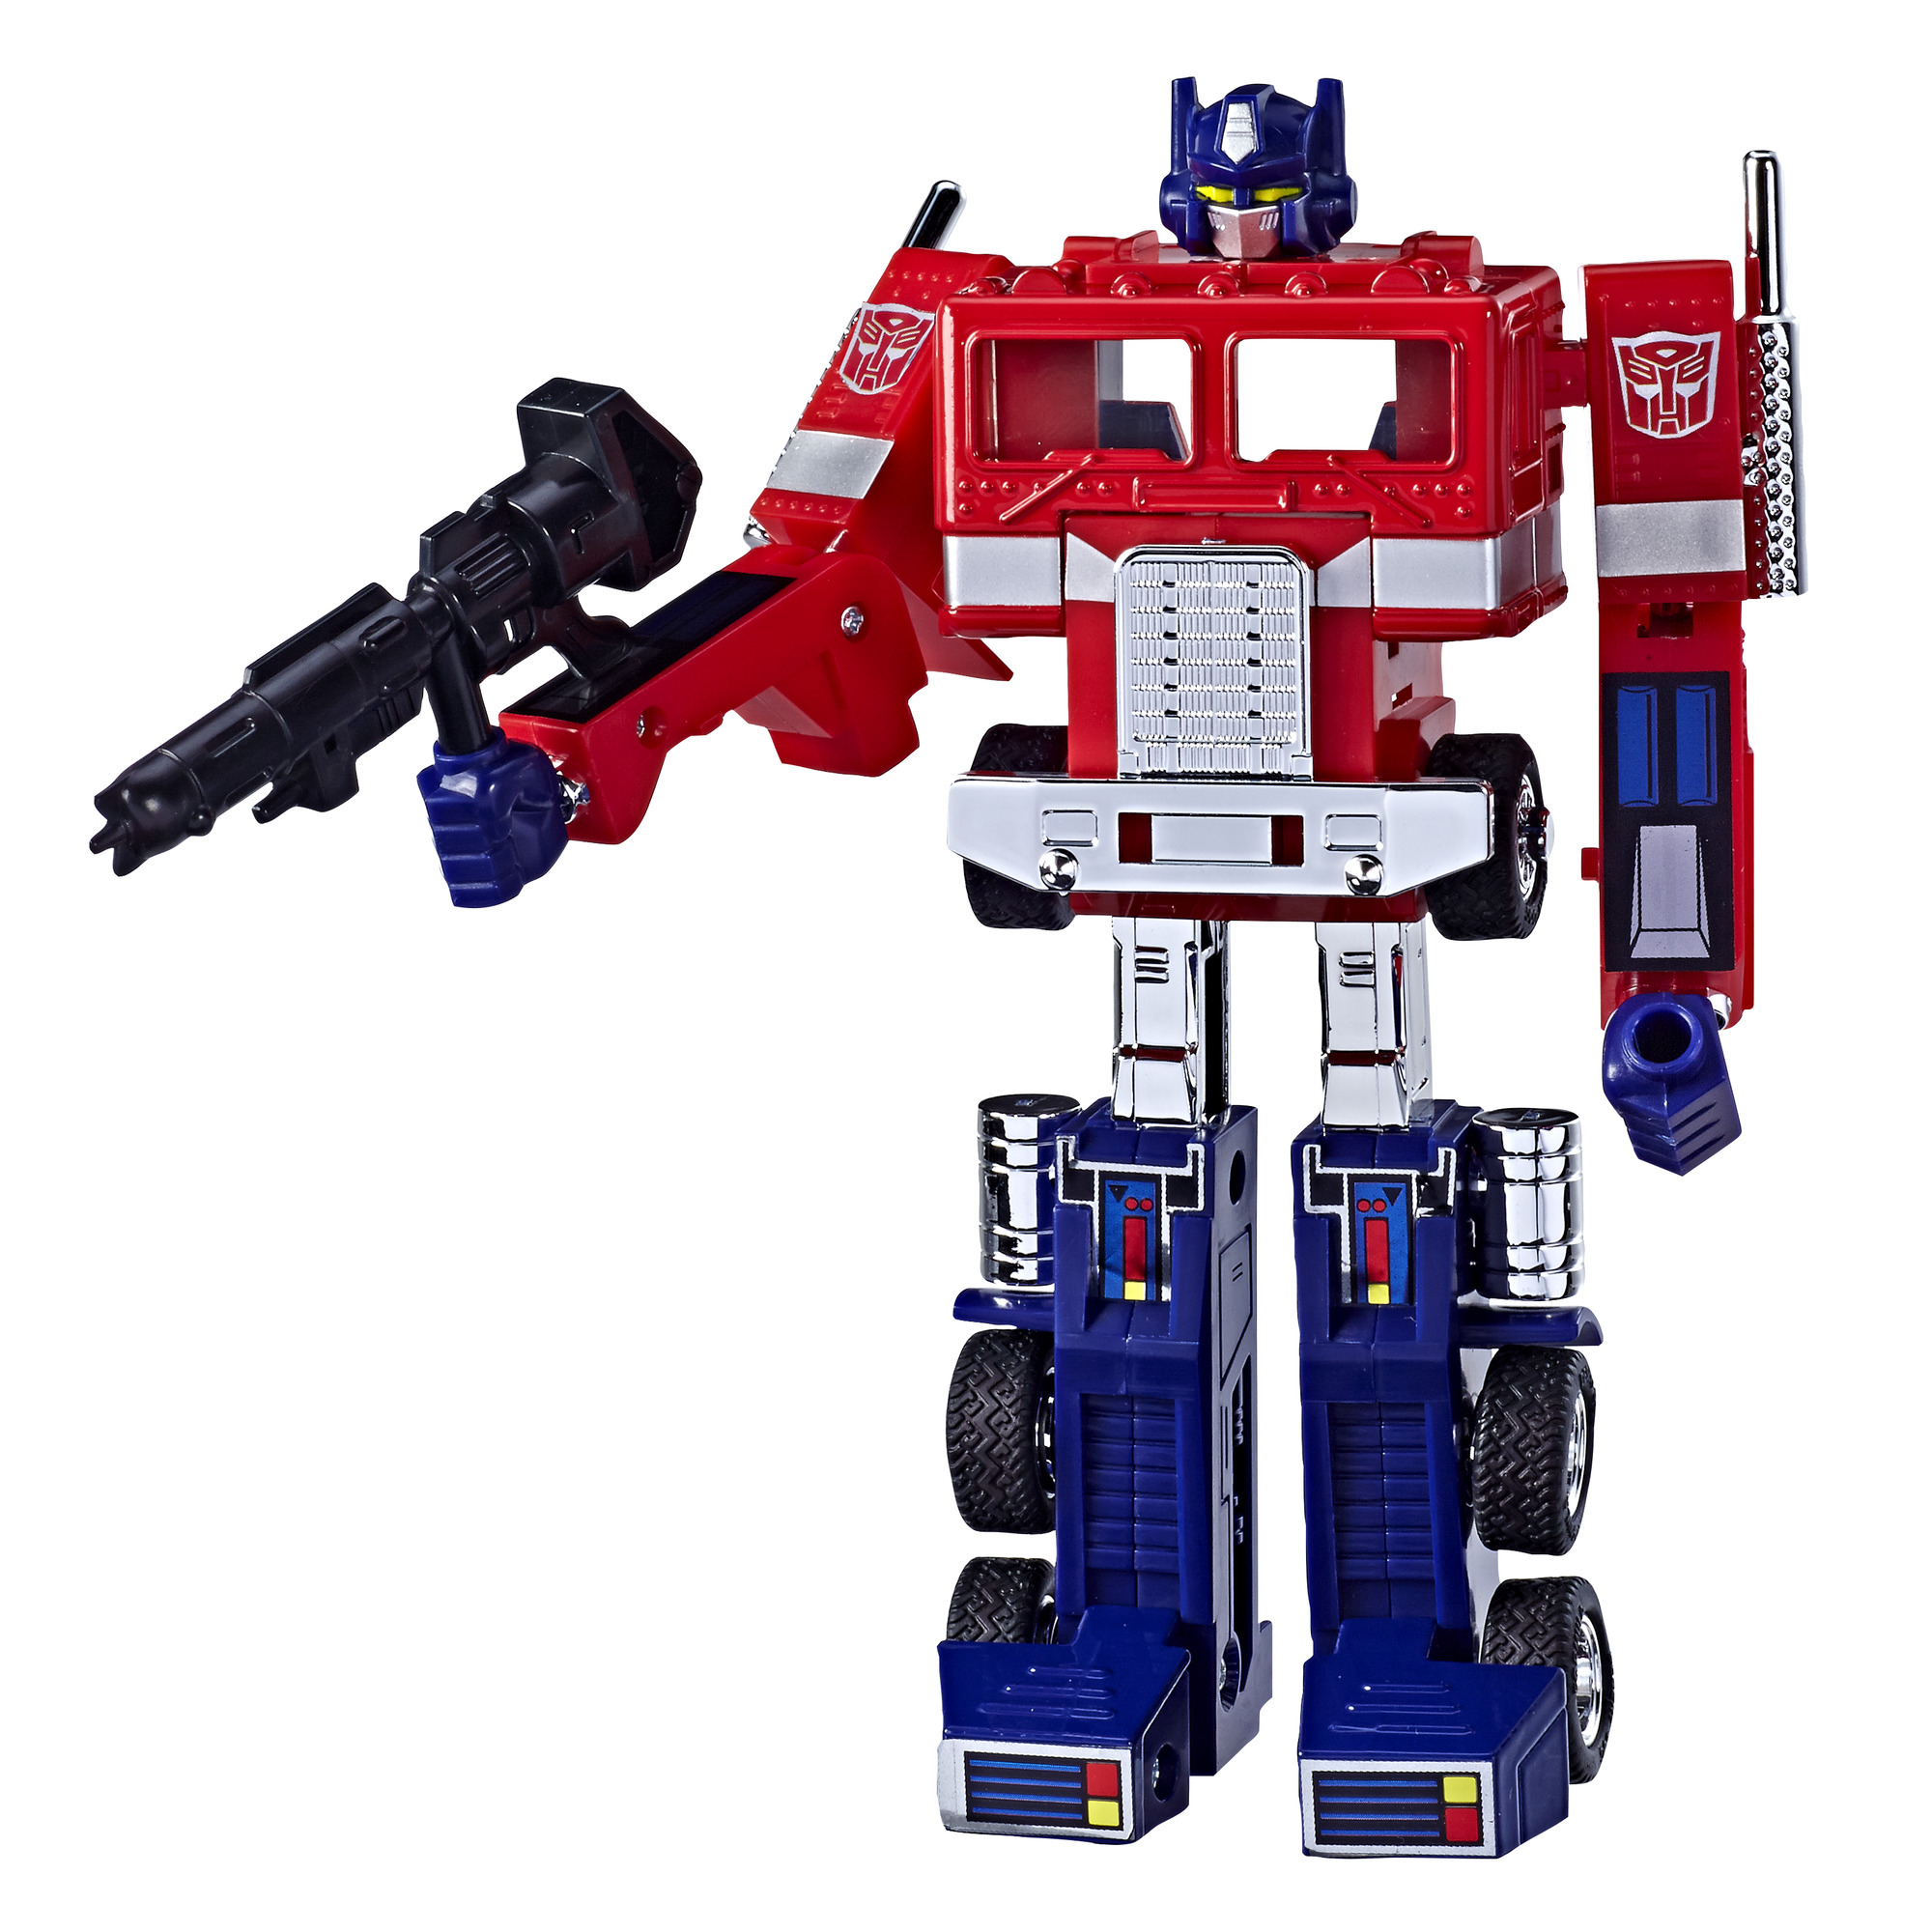 Buy Transformers Vintage G1 Optimus Prime Collectible Action Figure Includes 4 Accessories Online In Taiwan 210385764